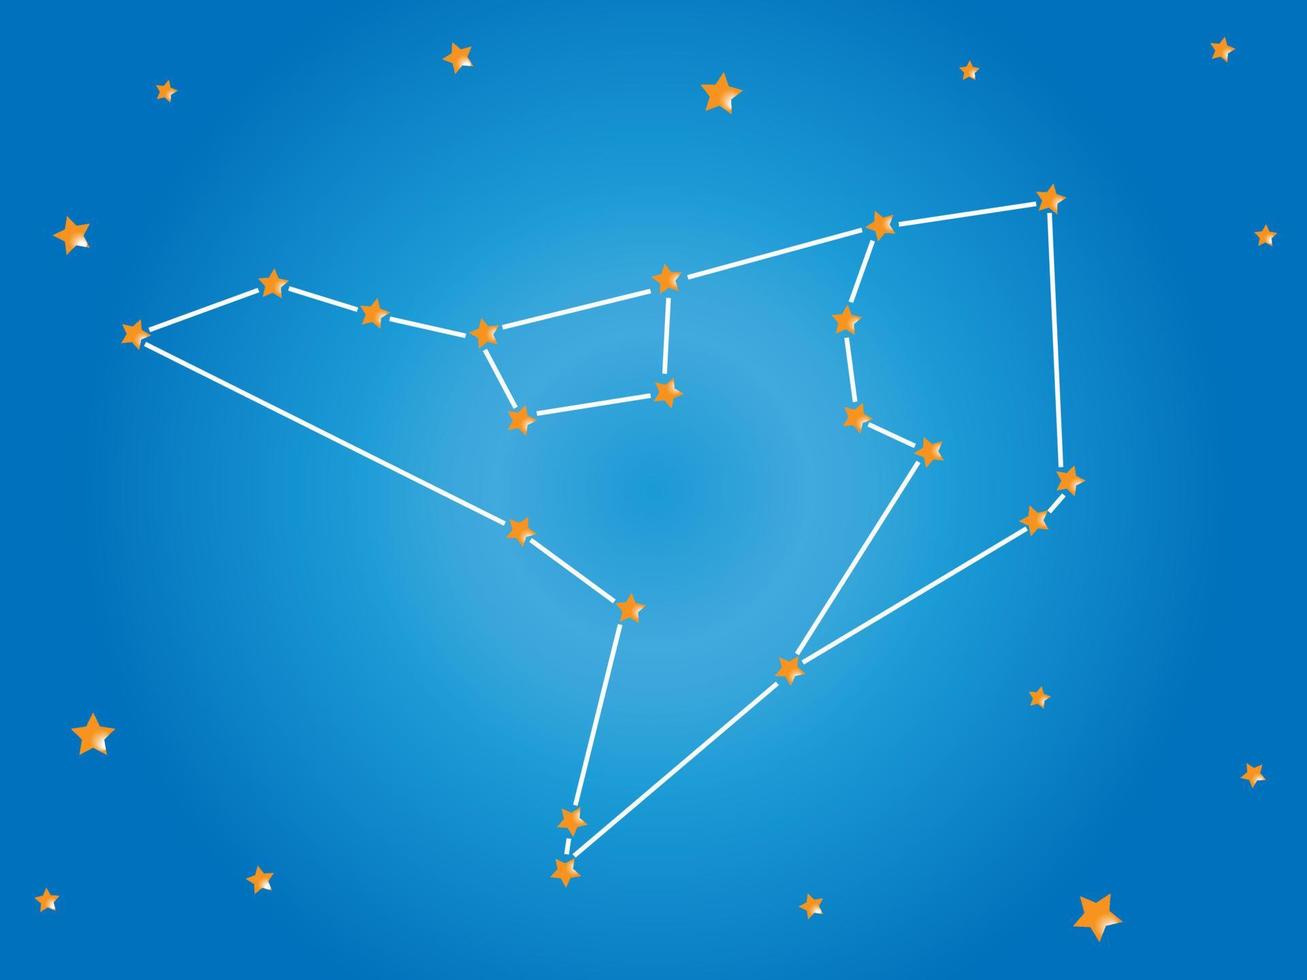 Ursa major Constellations in outer space. Zodiac Sign Ursa major constellation stars. Vector illustration.